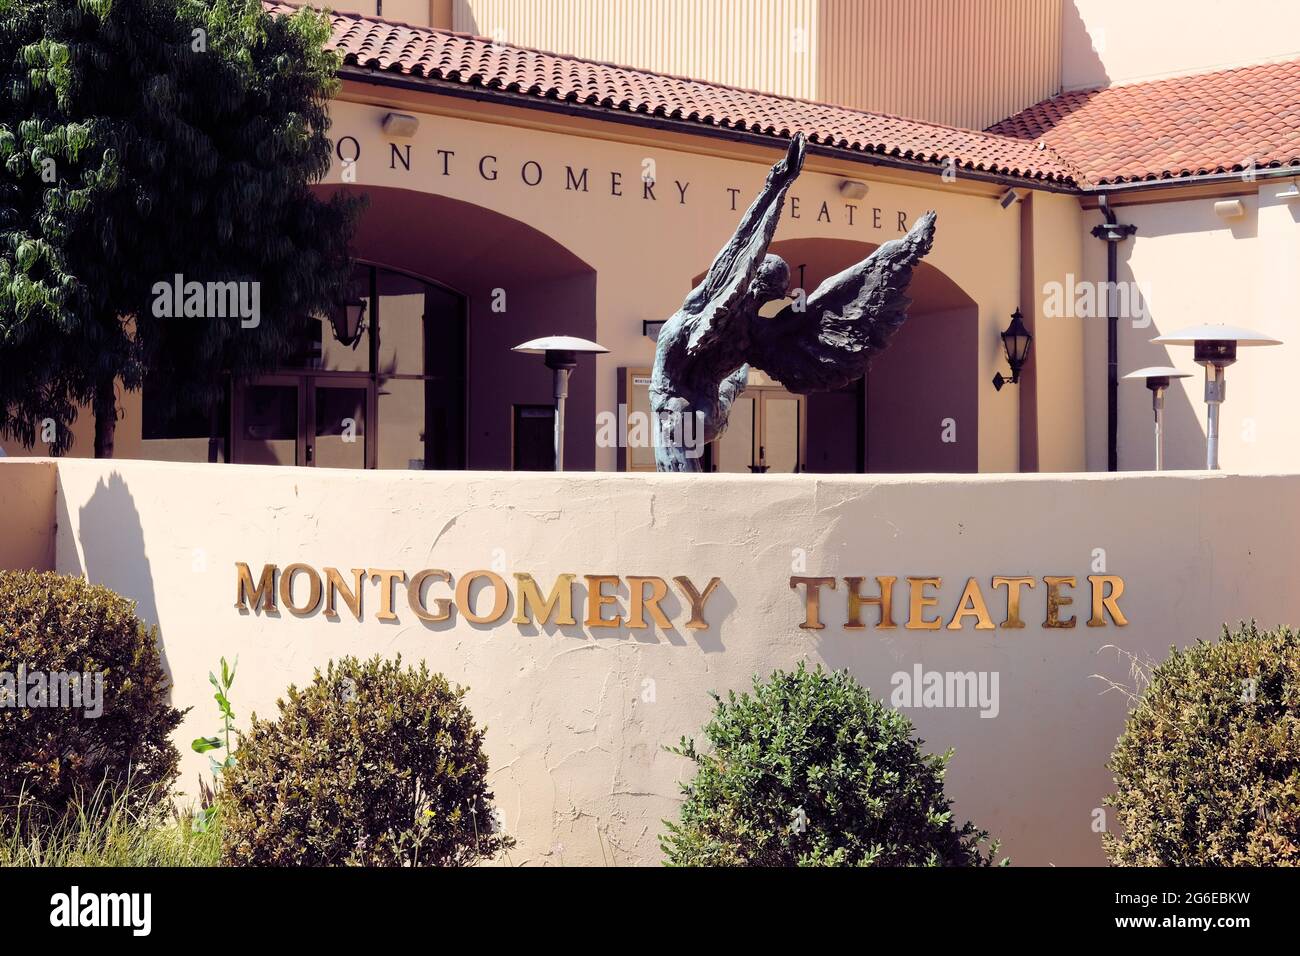 Exterior view of the Montgomery Theater, downtown San Jose, California; built in 1936 it shares a courtyard with the adjacent San Jose Civic theater. Stock Photo